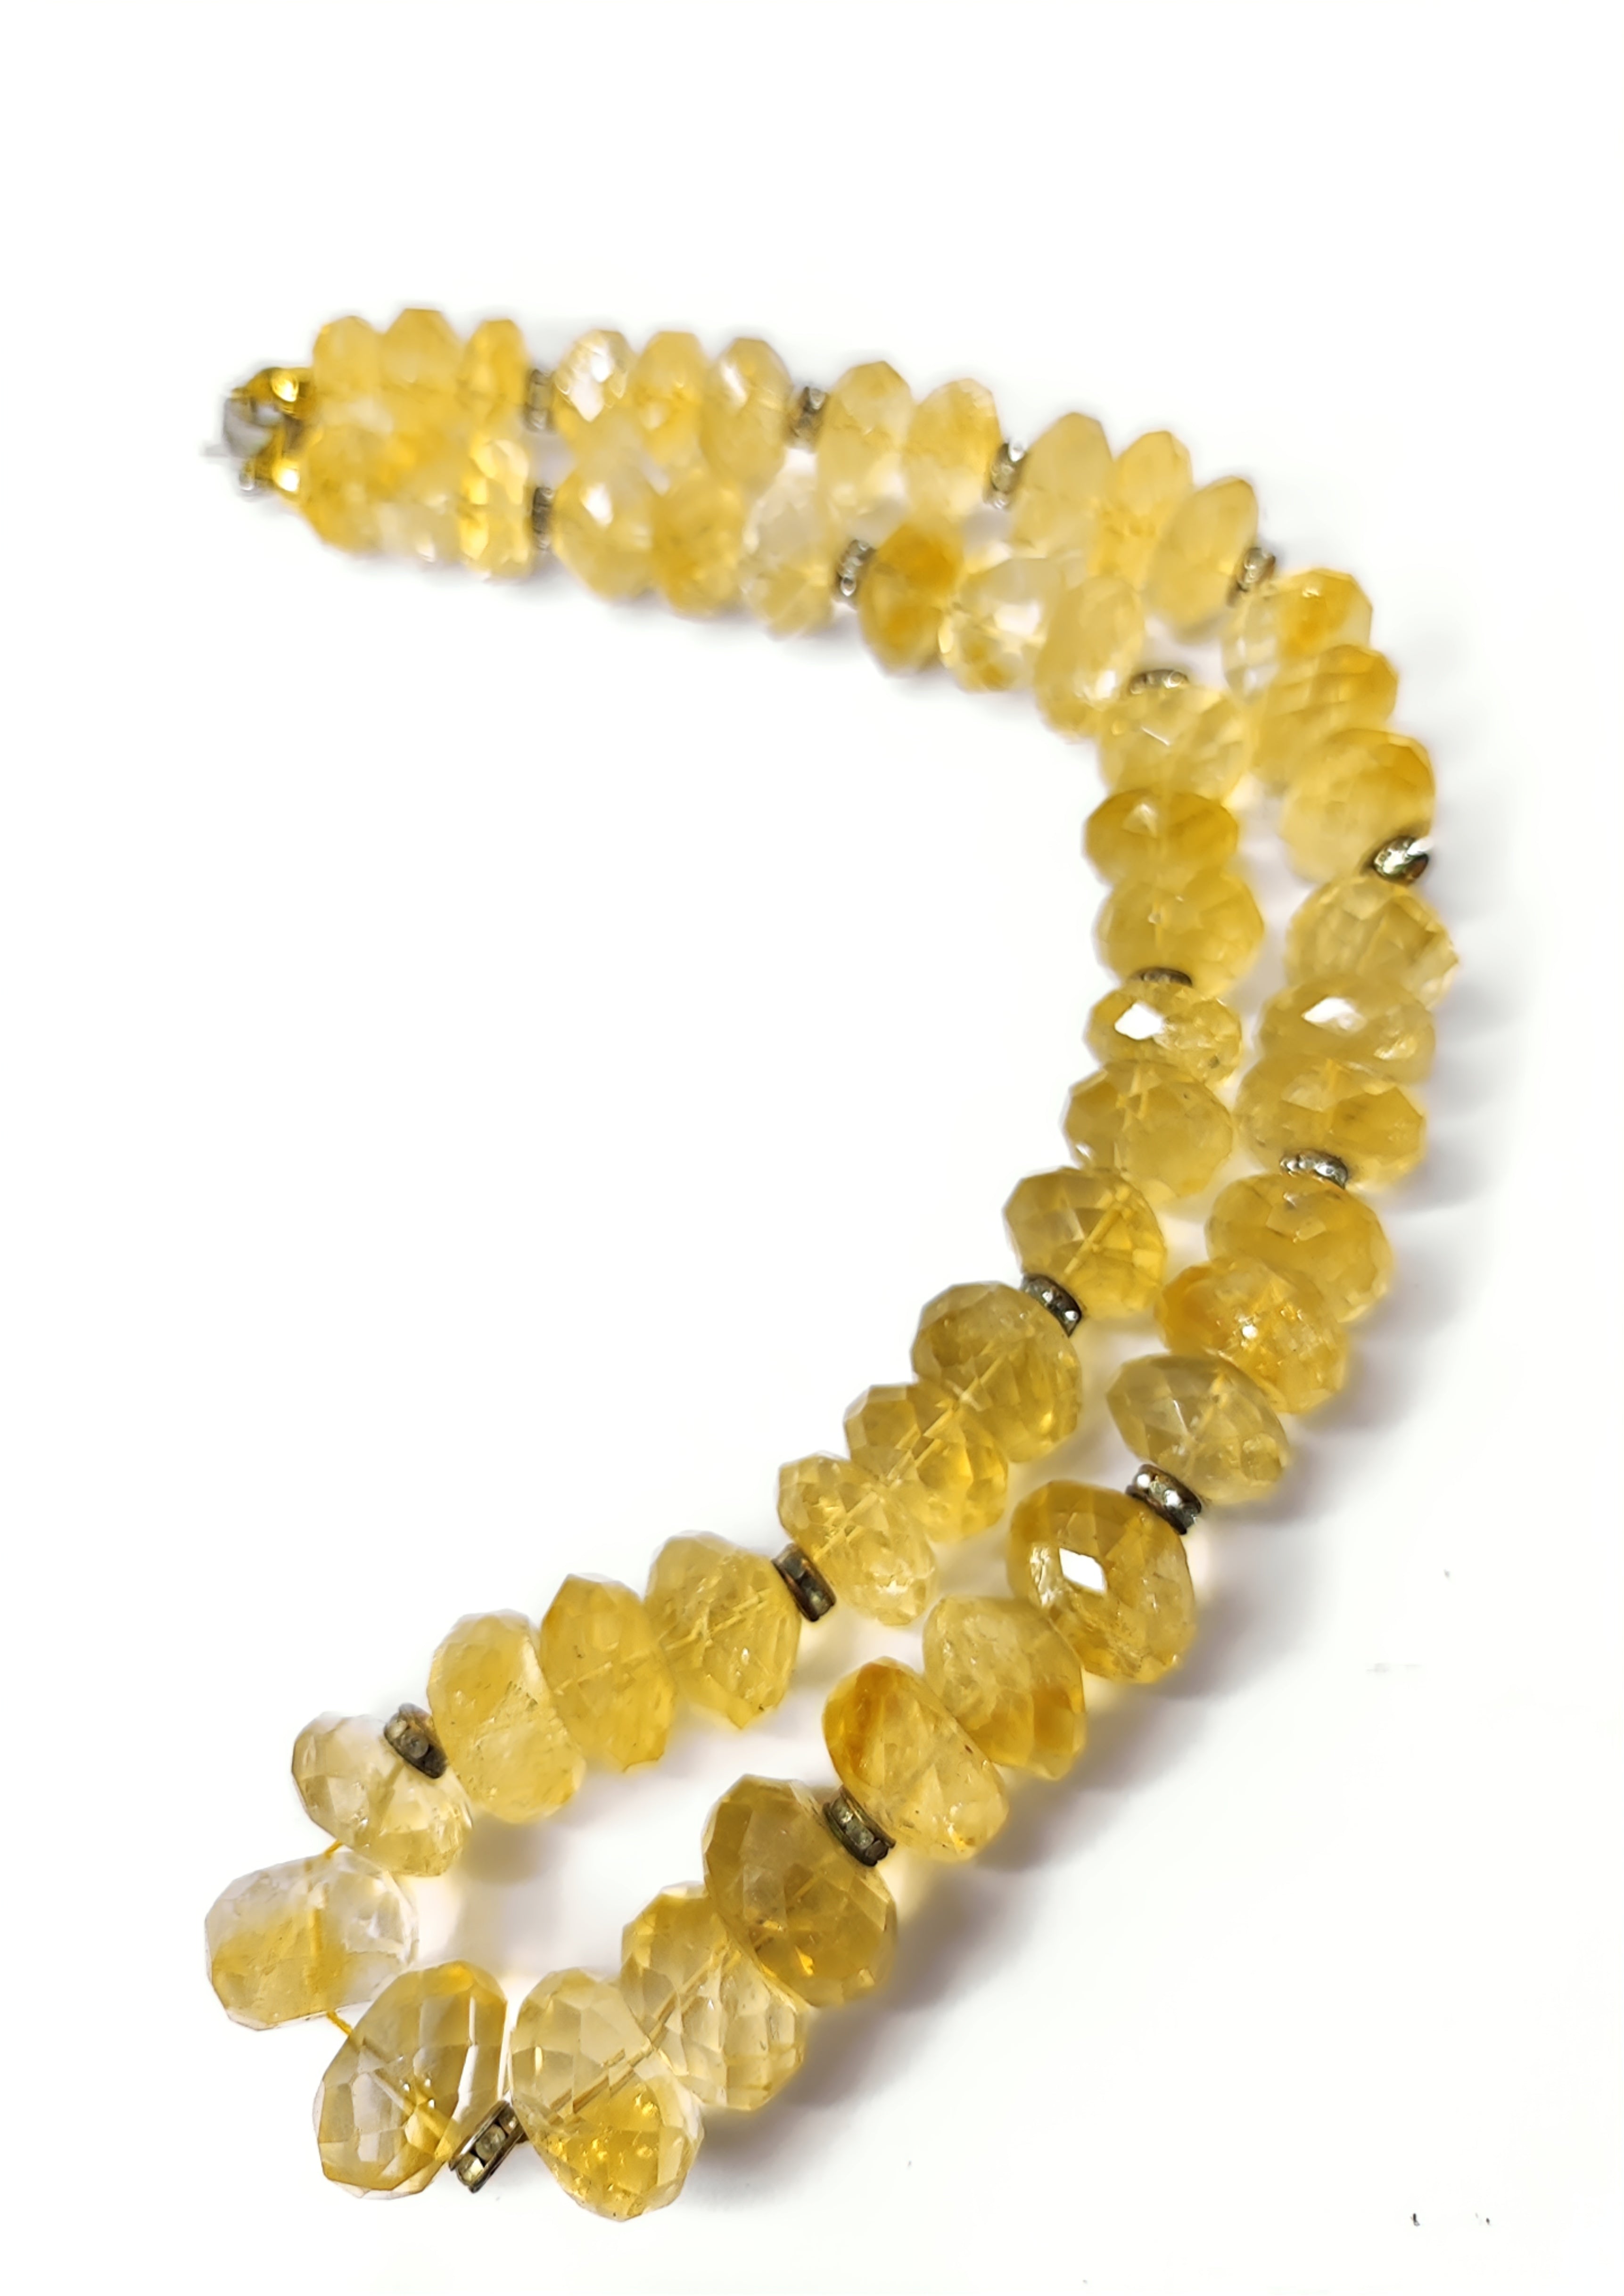 Citrine with Metal Beads (12mm) Necklace